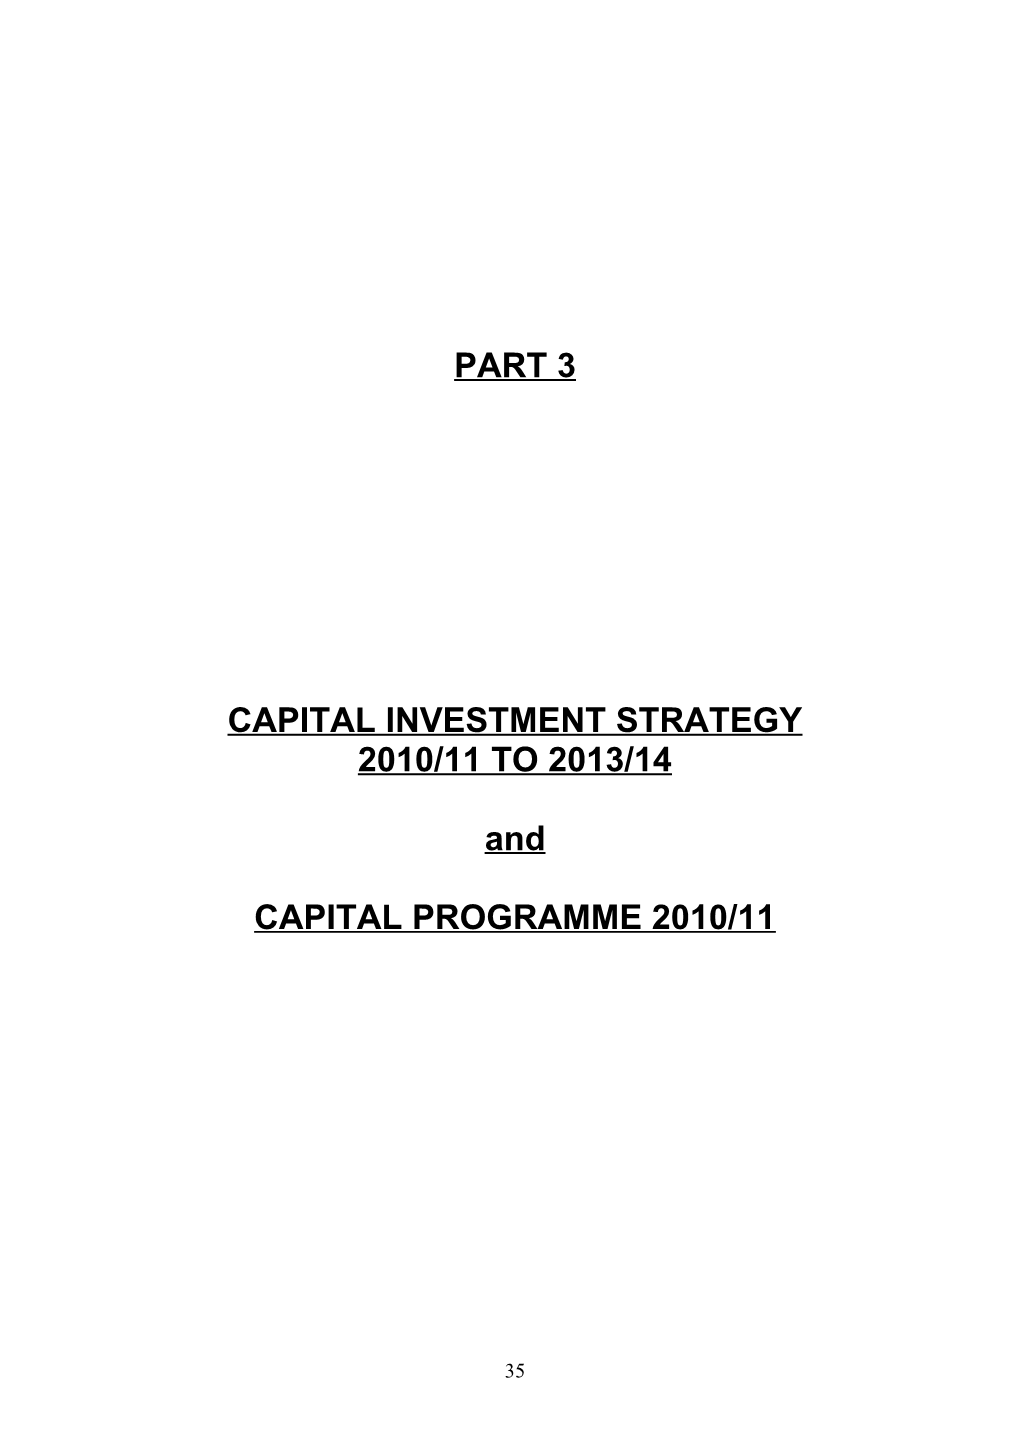 The Prudential Code for Capital Finance